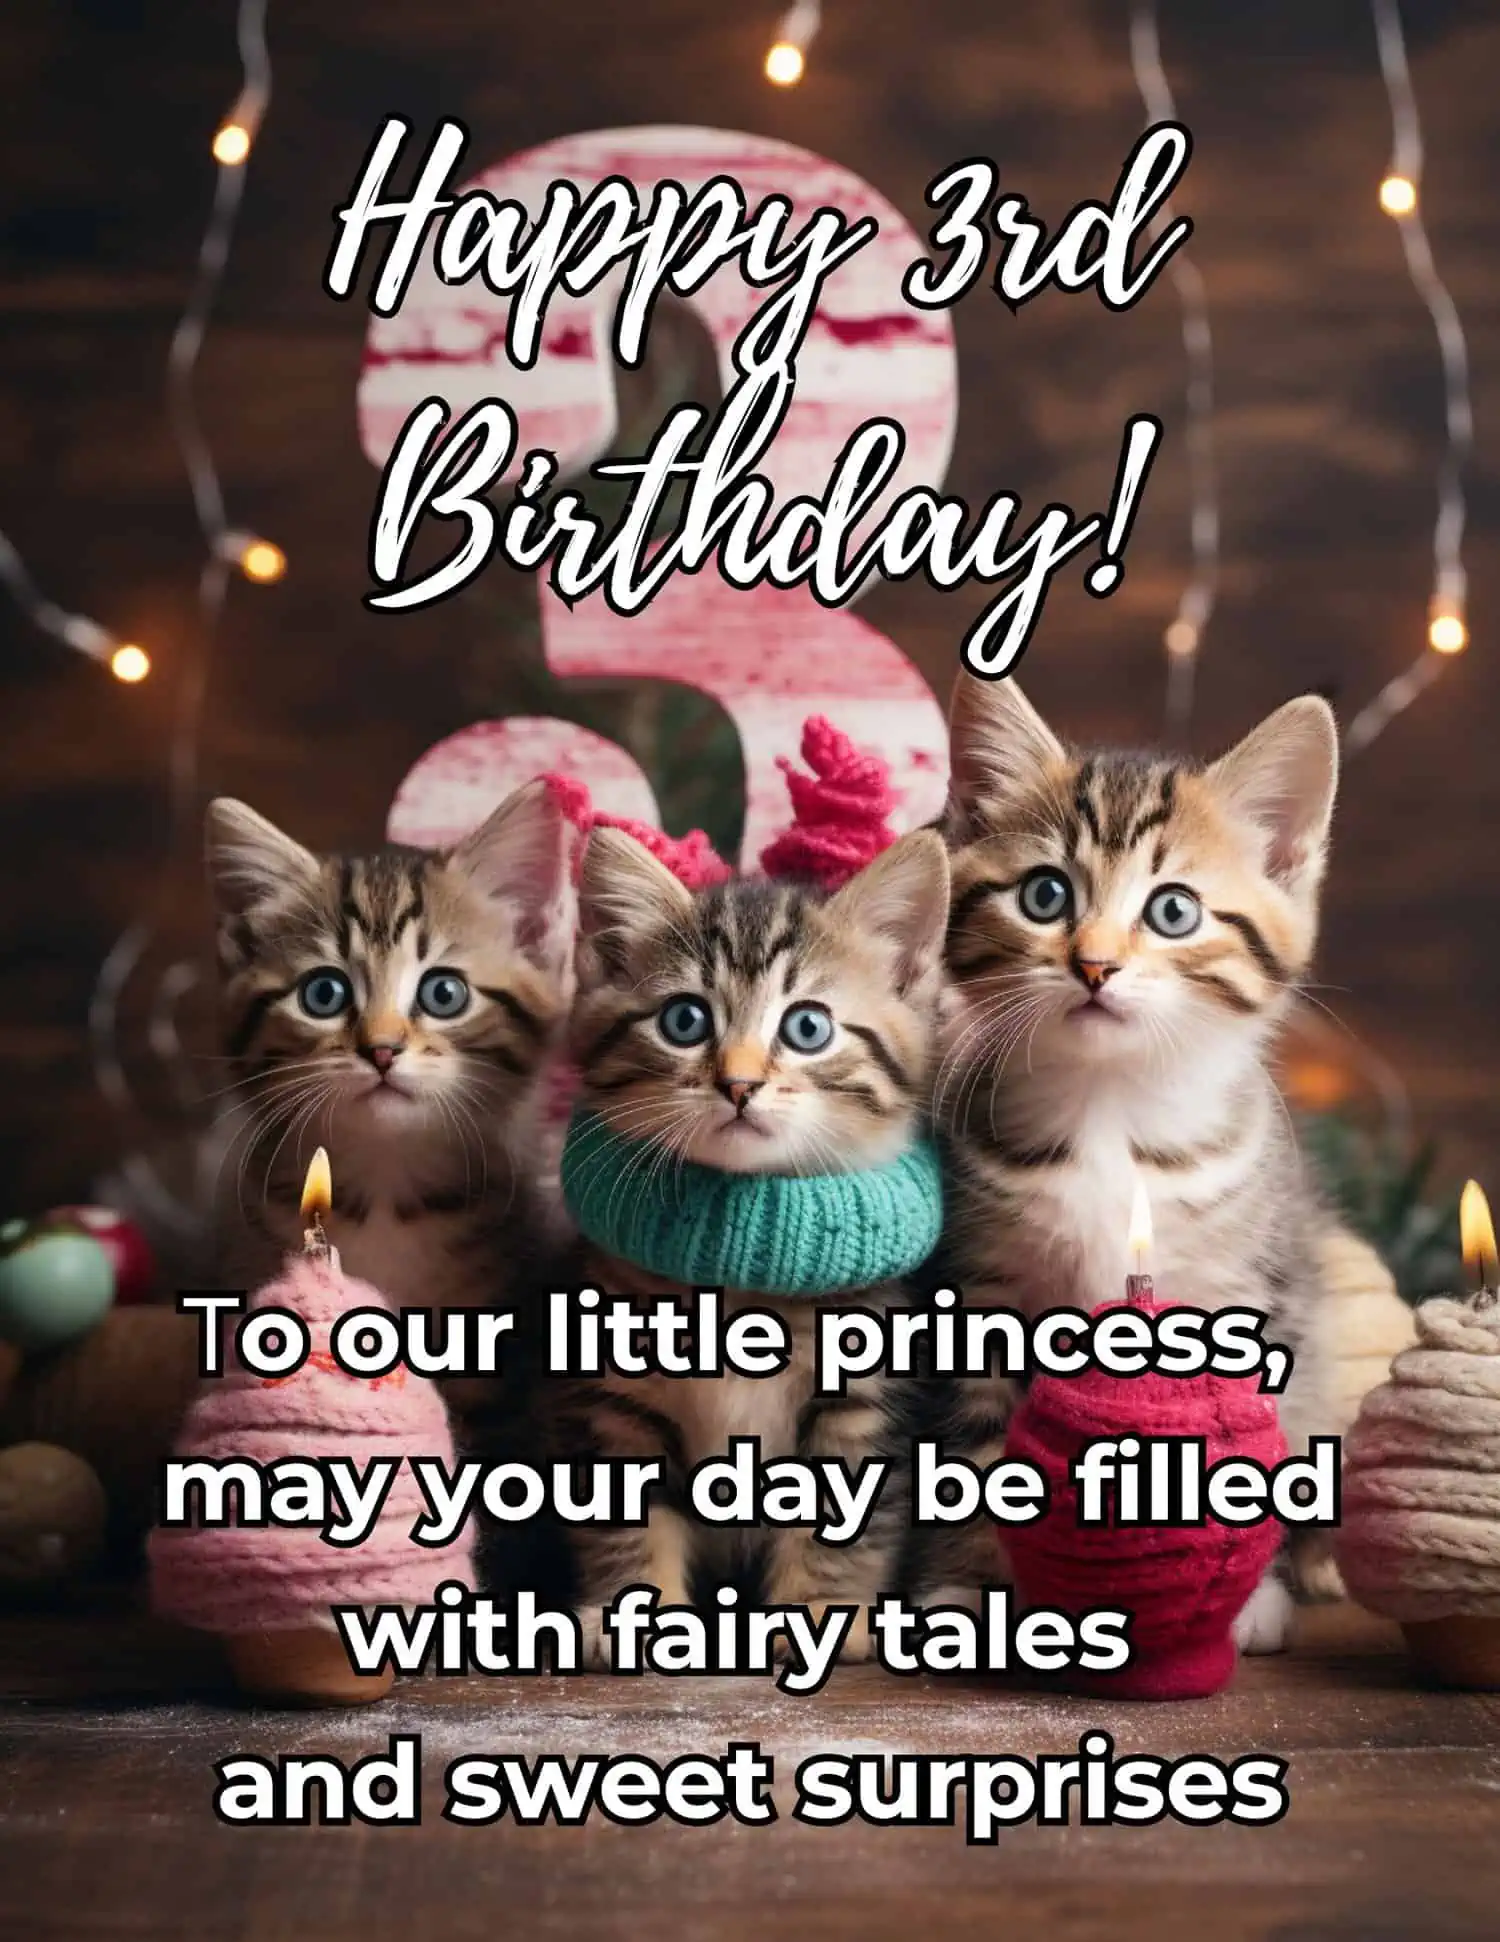 A collection of sweet and inspiring birthday wishes designed specifically for a daughter celebrating her third birthday, capturing the essence of love, growth, and wonderment typical of this delightful age.